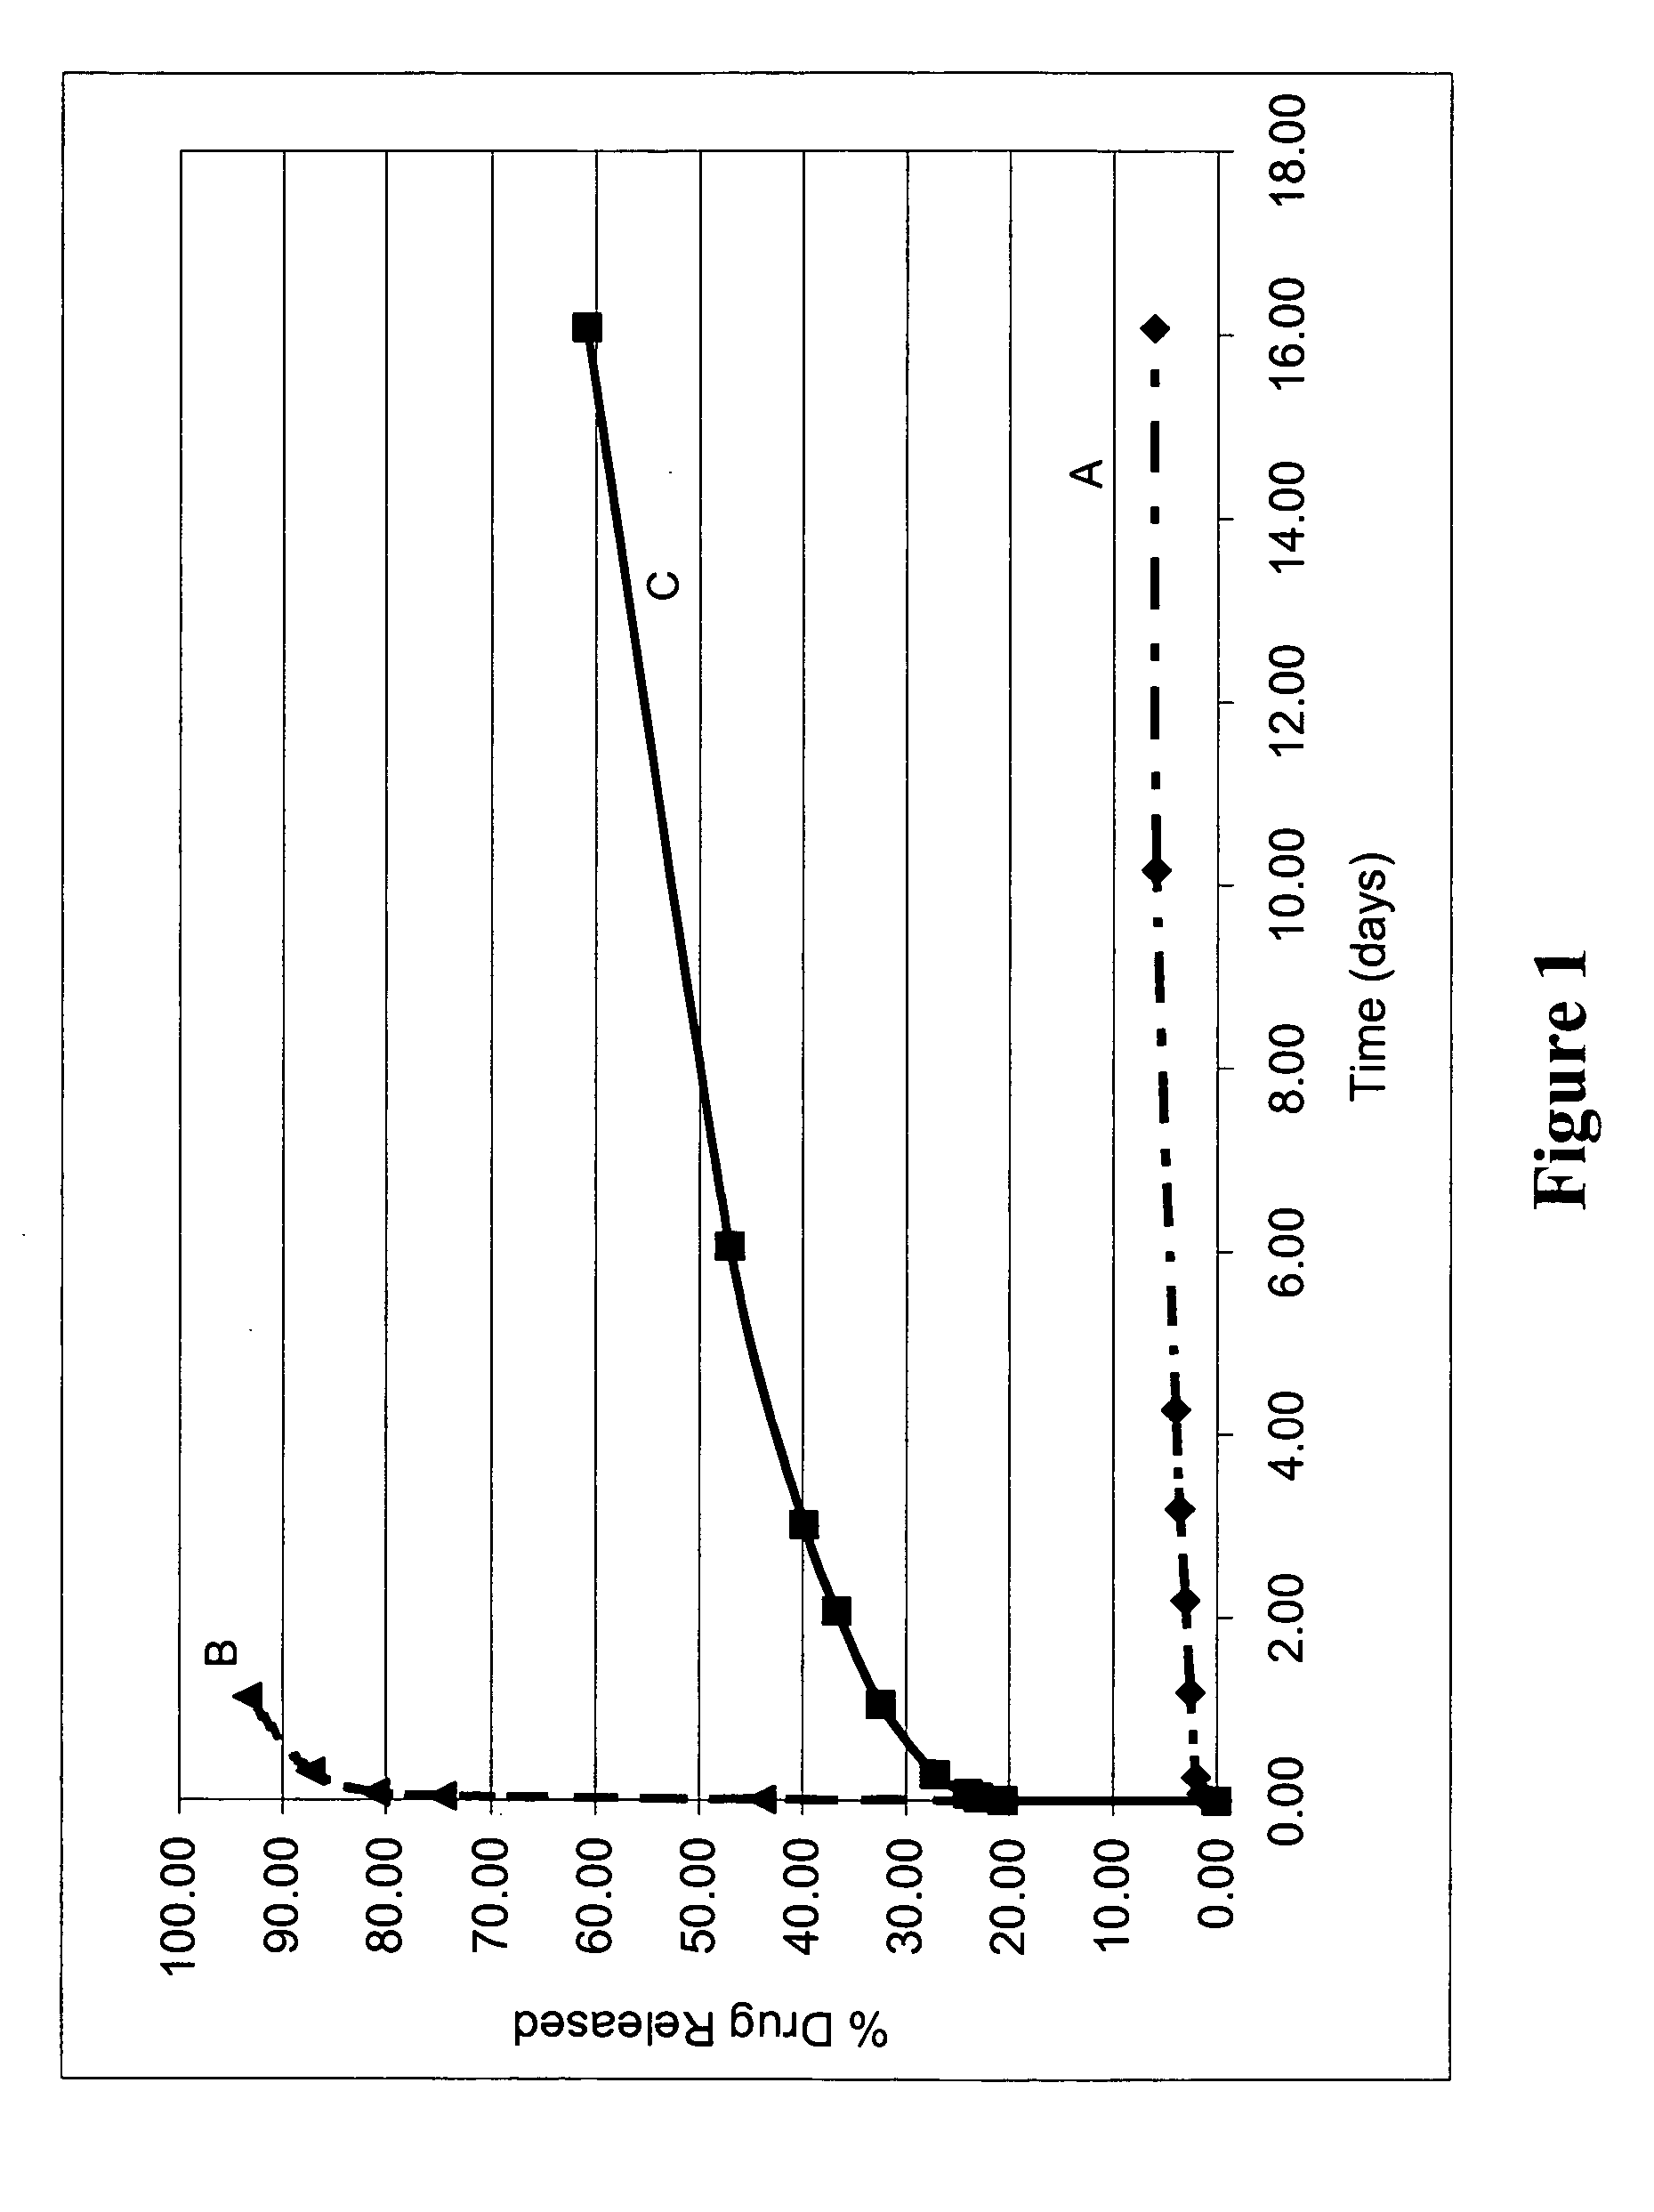 Biodegradable coating compositions including multiple layers